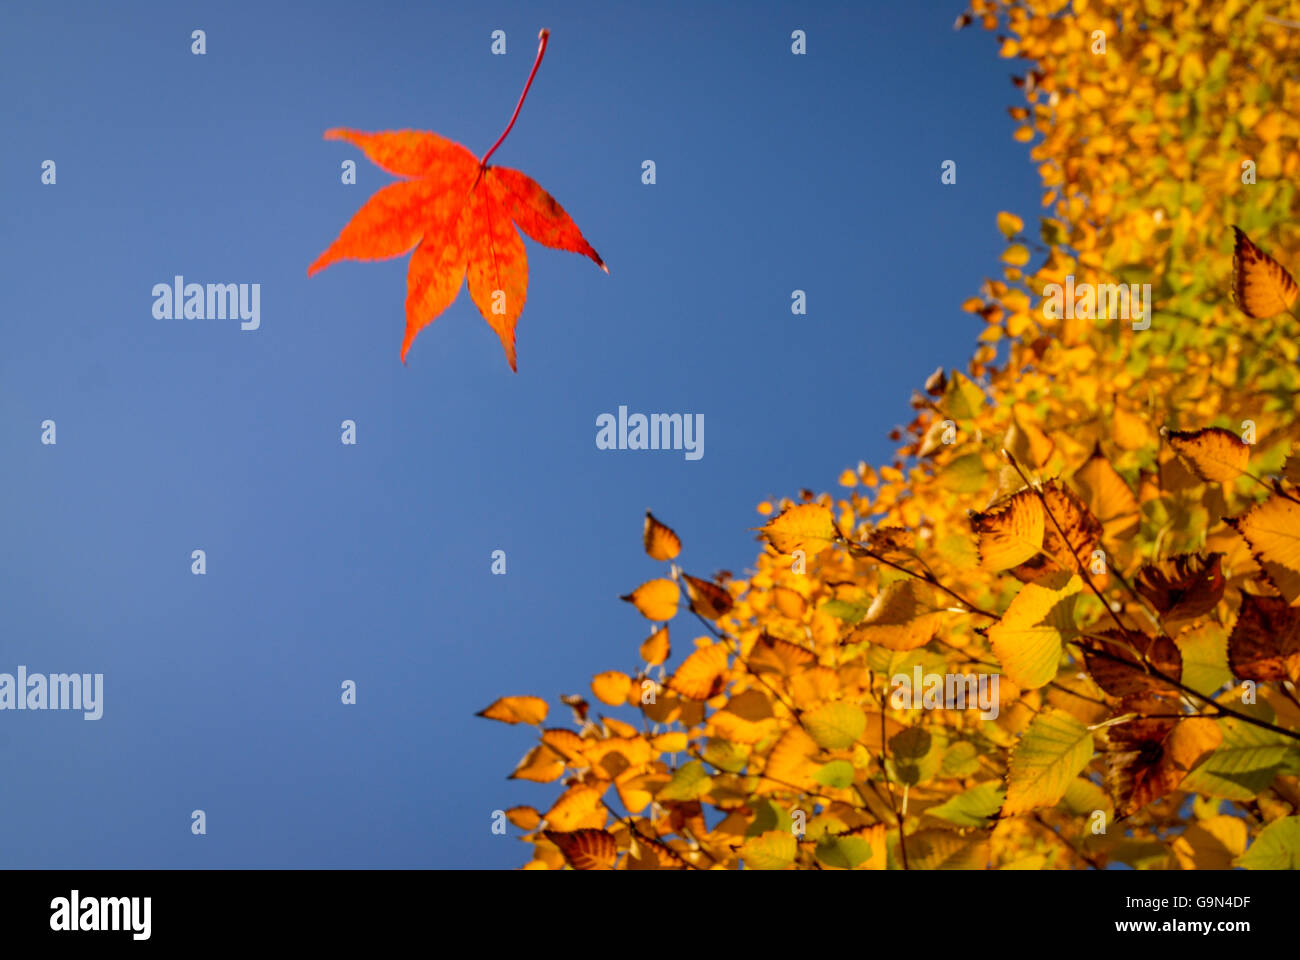 An Acer leaf falls past a Betula Costata tree at the start of autumn / fall. Stock Photo